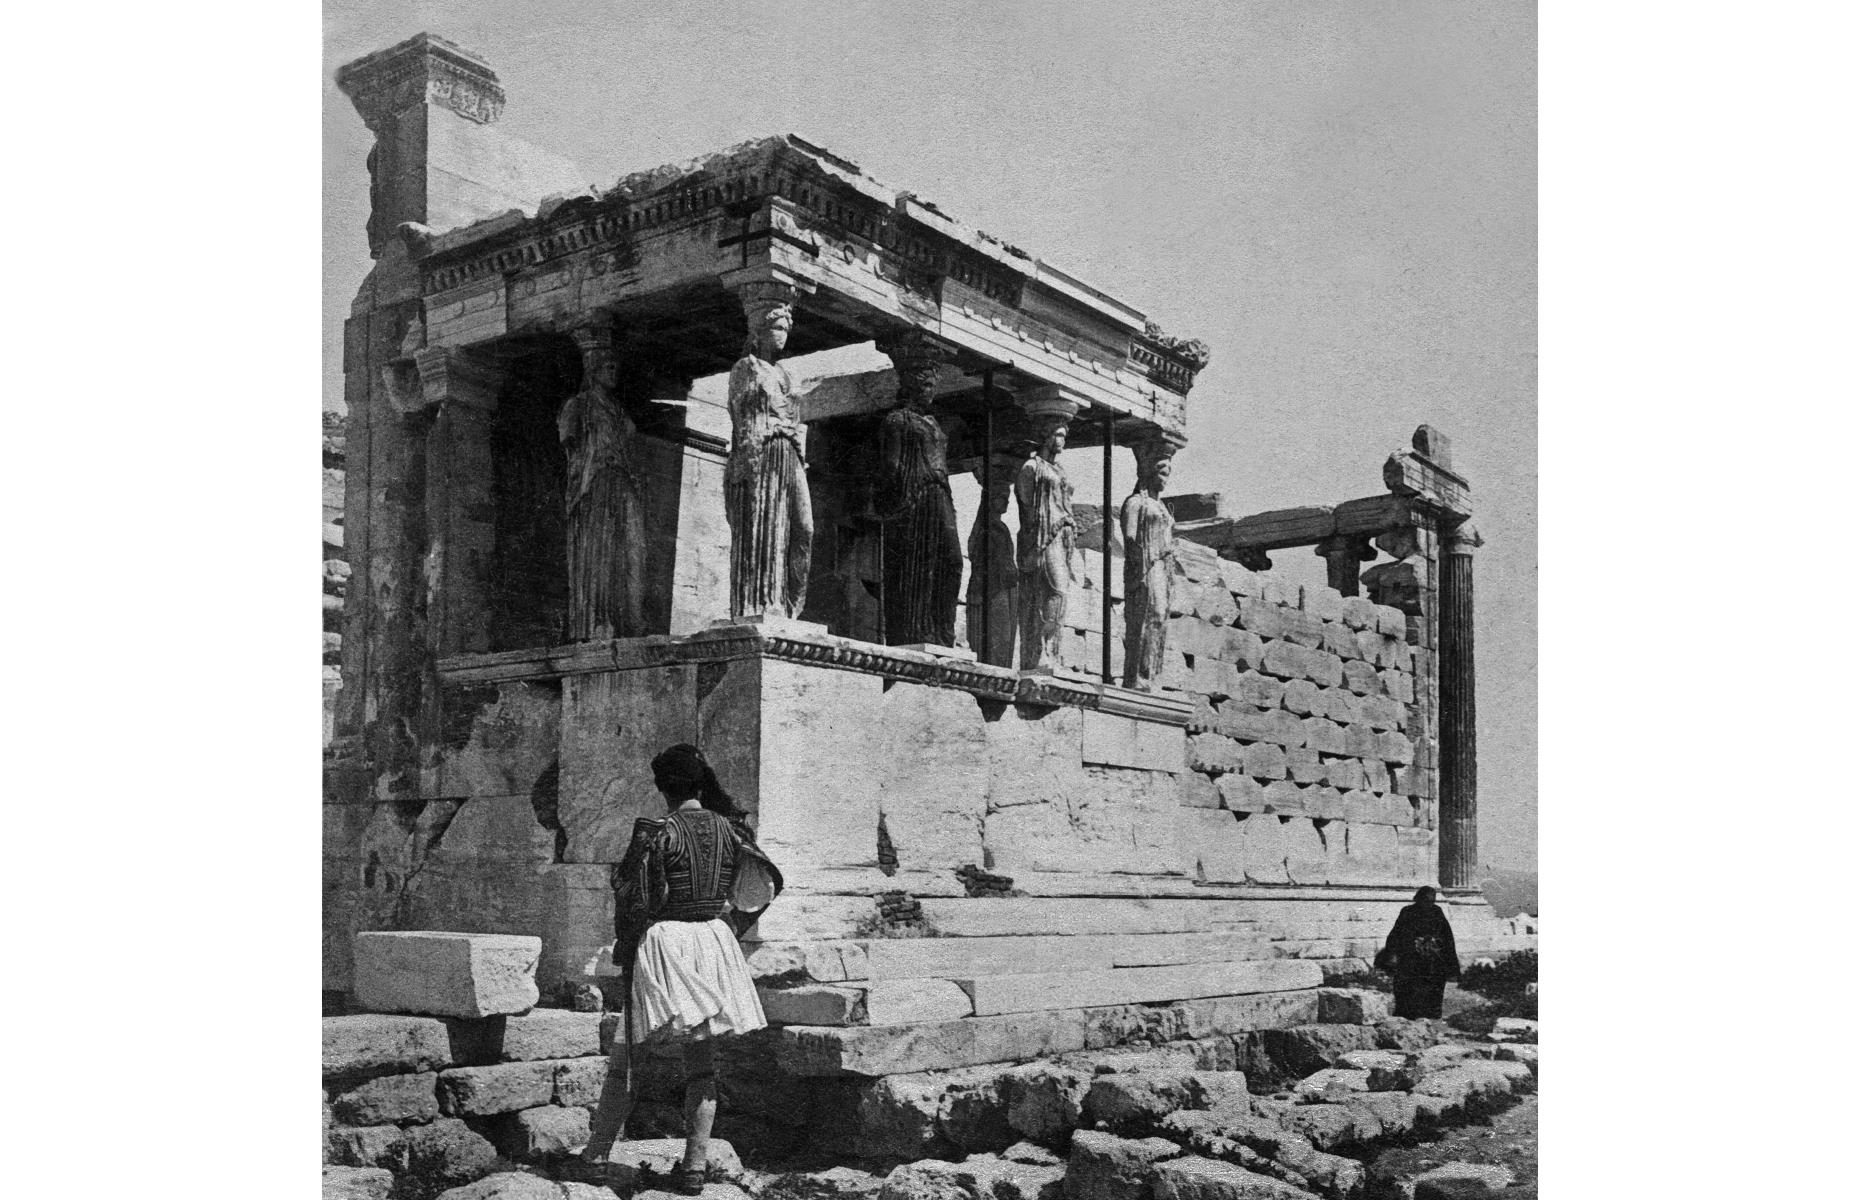 <p>The UNESCO World Heritage Site of Acropolis in Athens is one of the oldest and most famous archaeological sites in the world. Located on a limestone hill above the city, it has been inhabited since prehistoric times, and today it’s a popular attraction usually visited by 14.5 million people each year. Pictured here in 1897 is the Erechtheion Temple, which was built between 421 and 406 BC.</p>